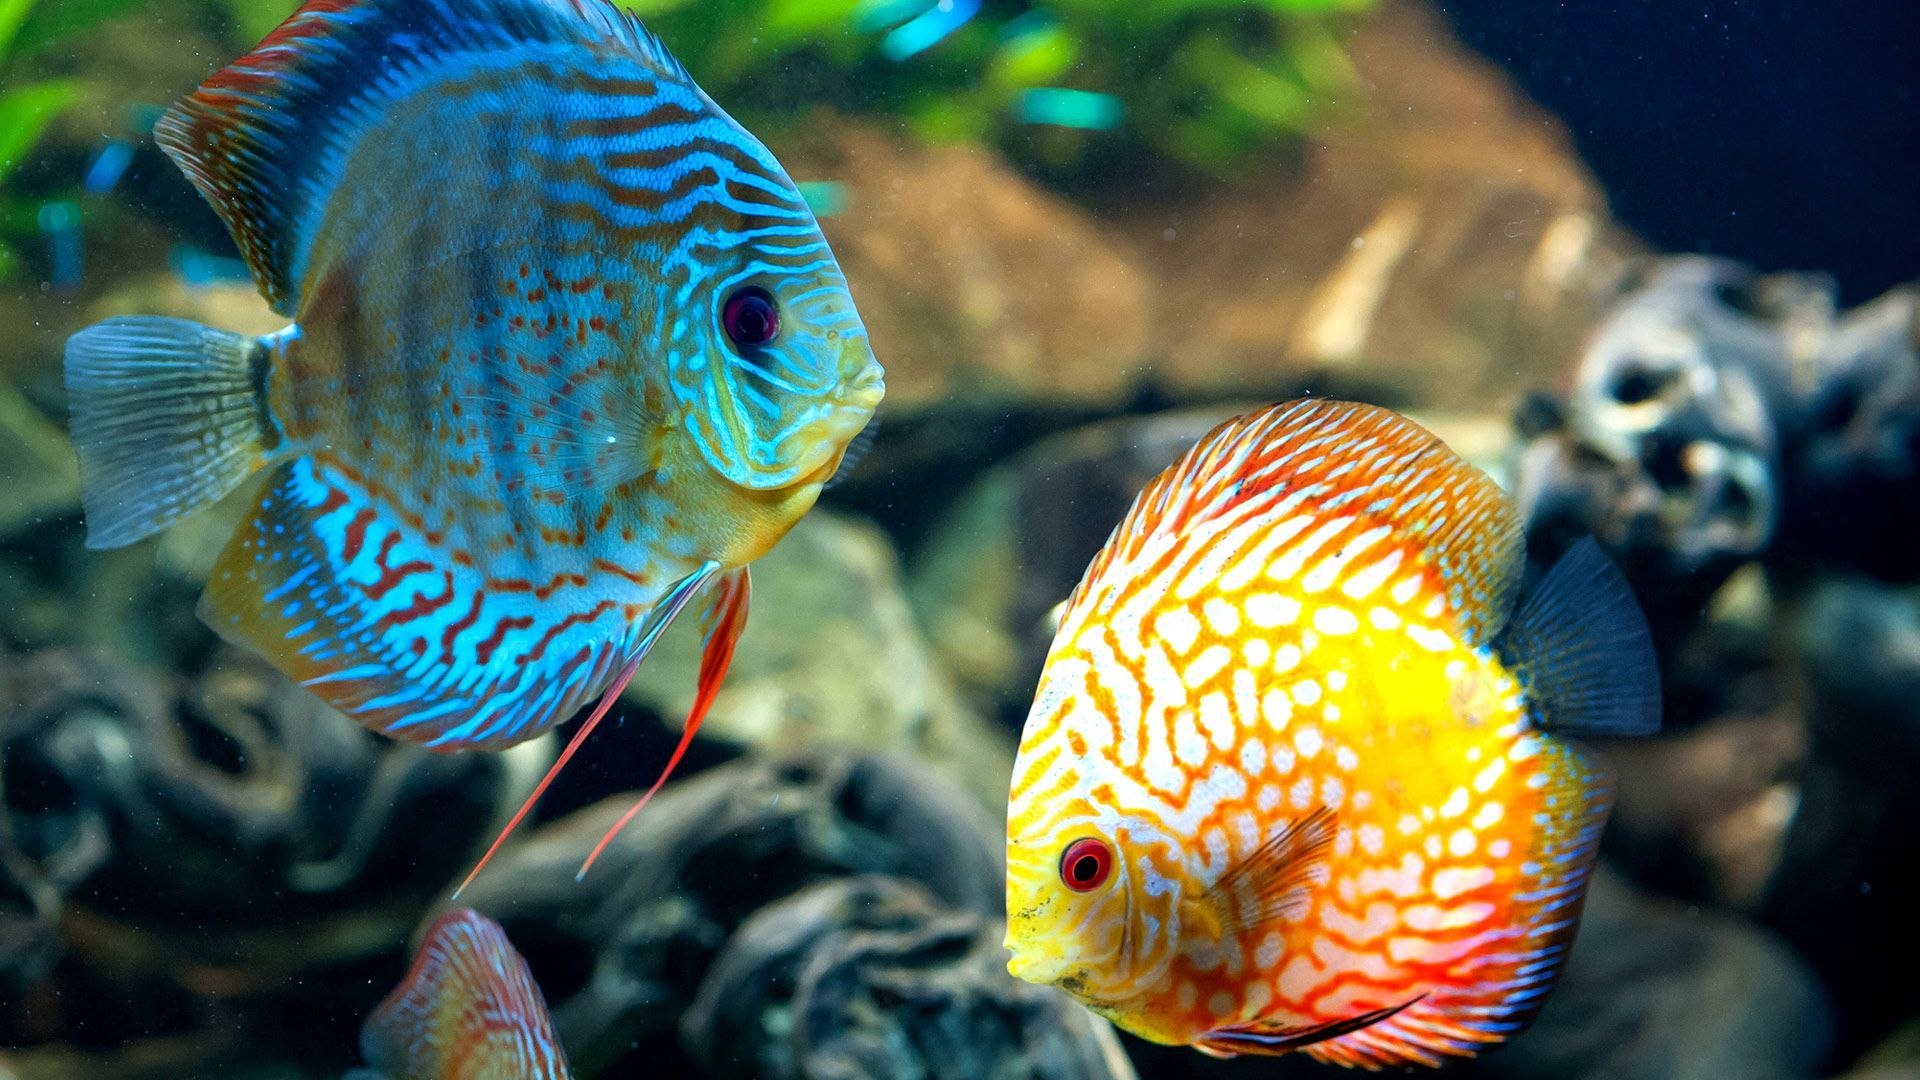 Coral Reef Fish wallpapers – Free full hd wallpapers for 1080p ...